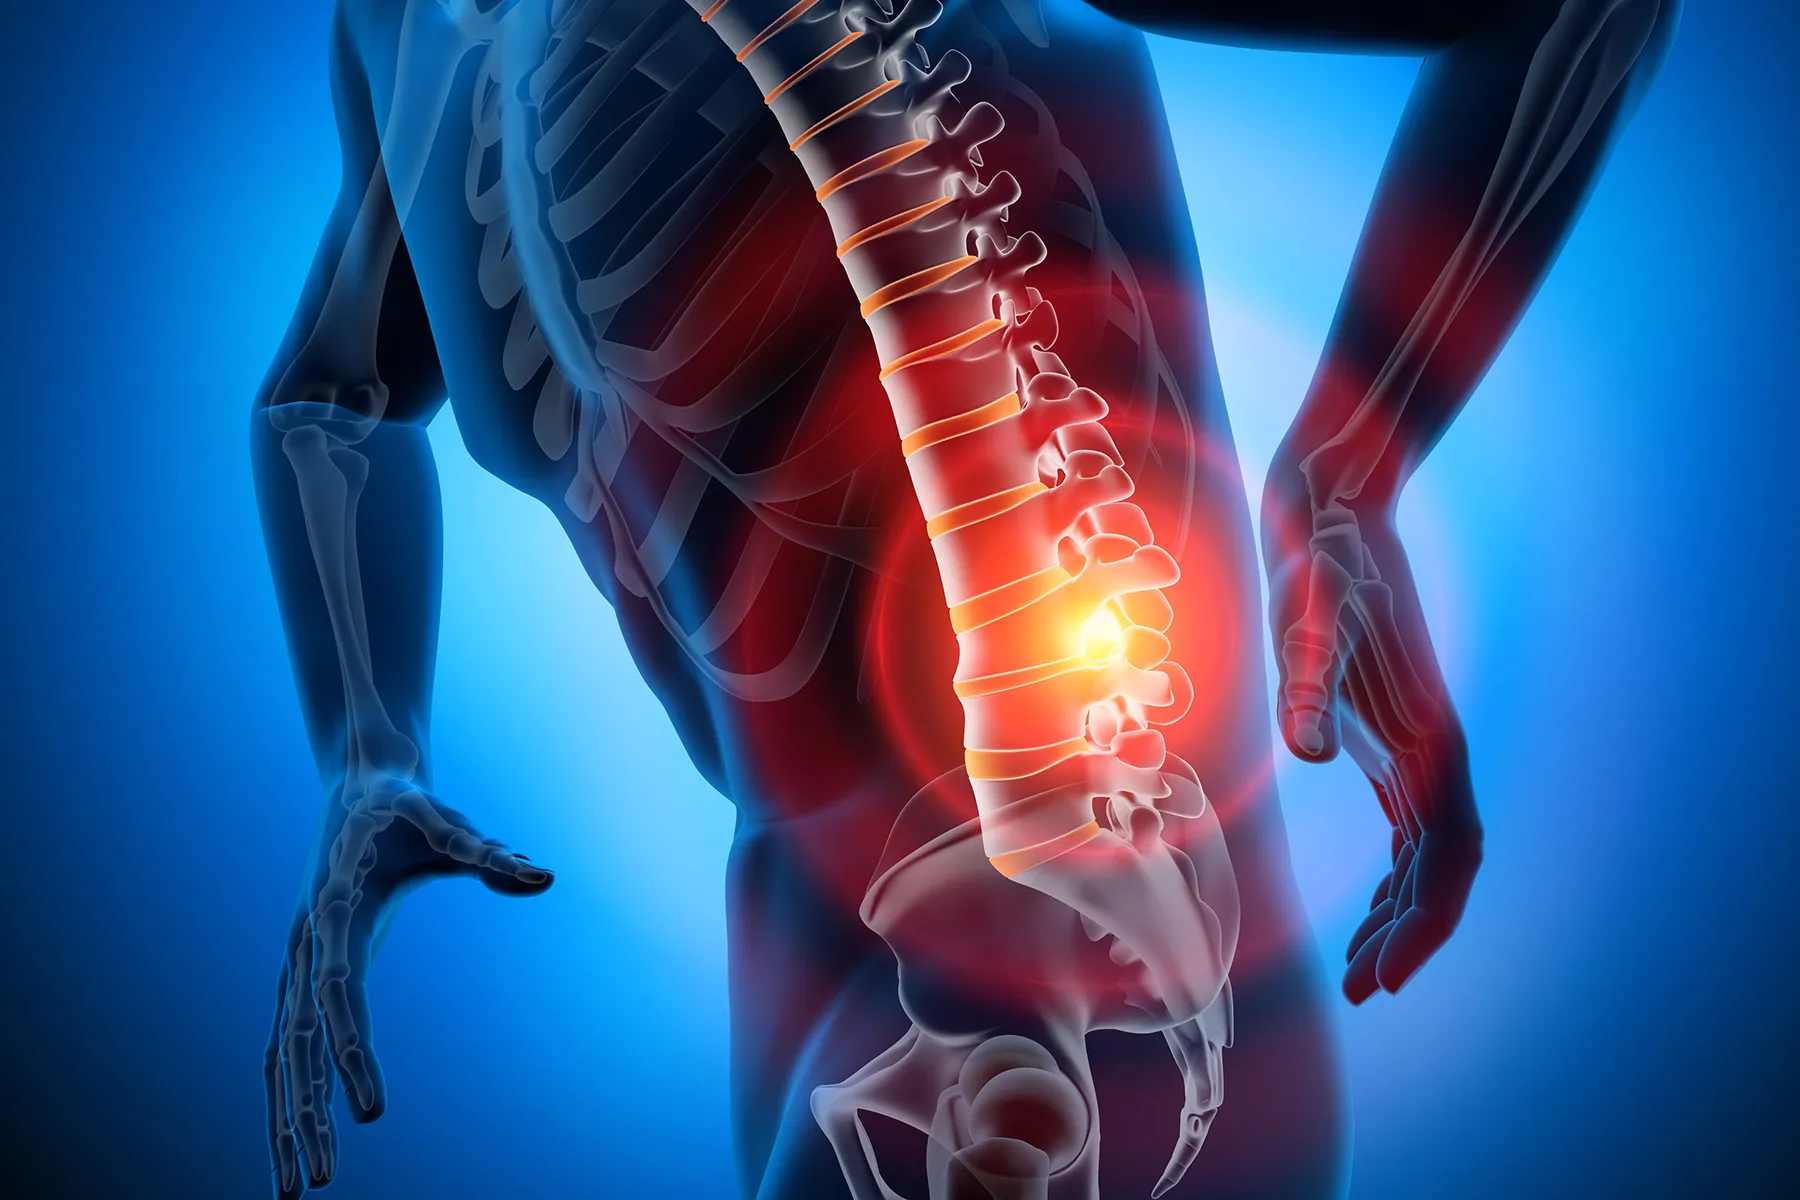 Injected ‘Hydrogel’ May Be New Option Against Back Pain